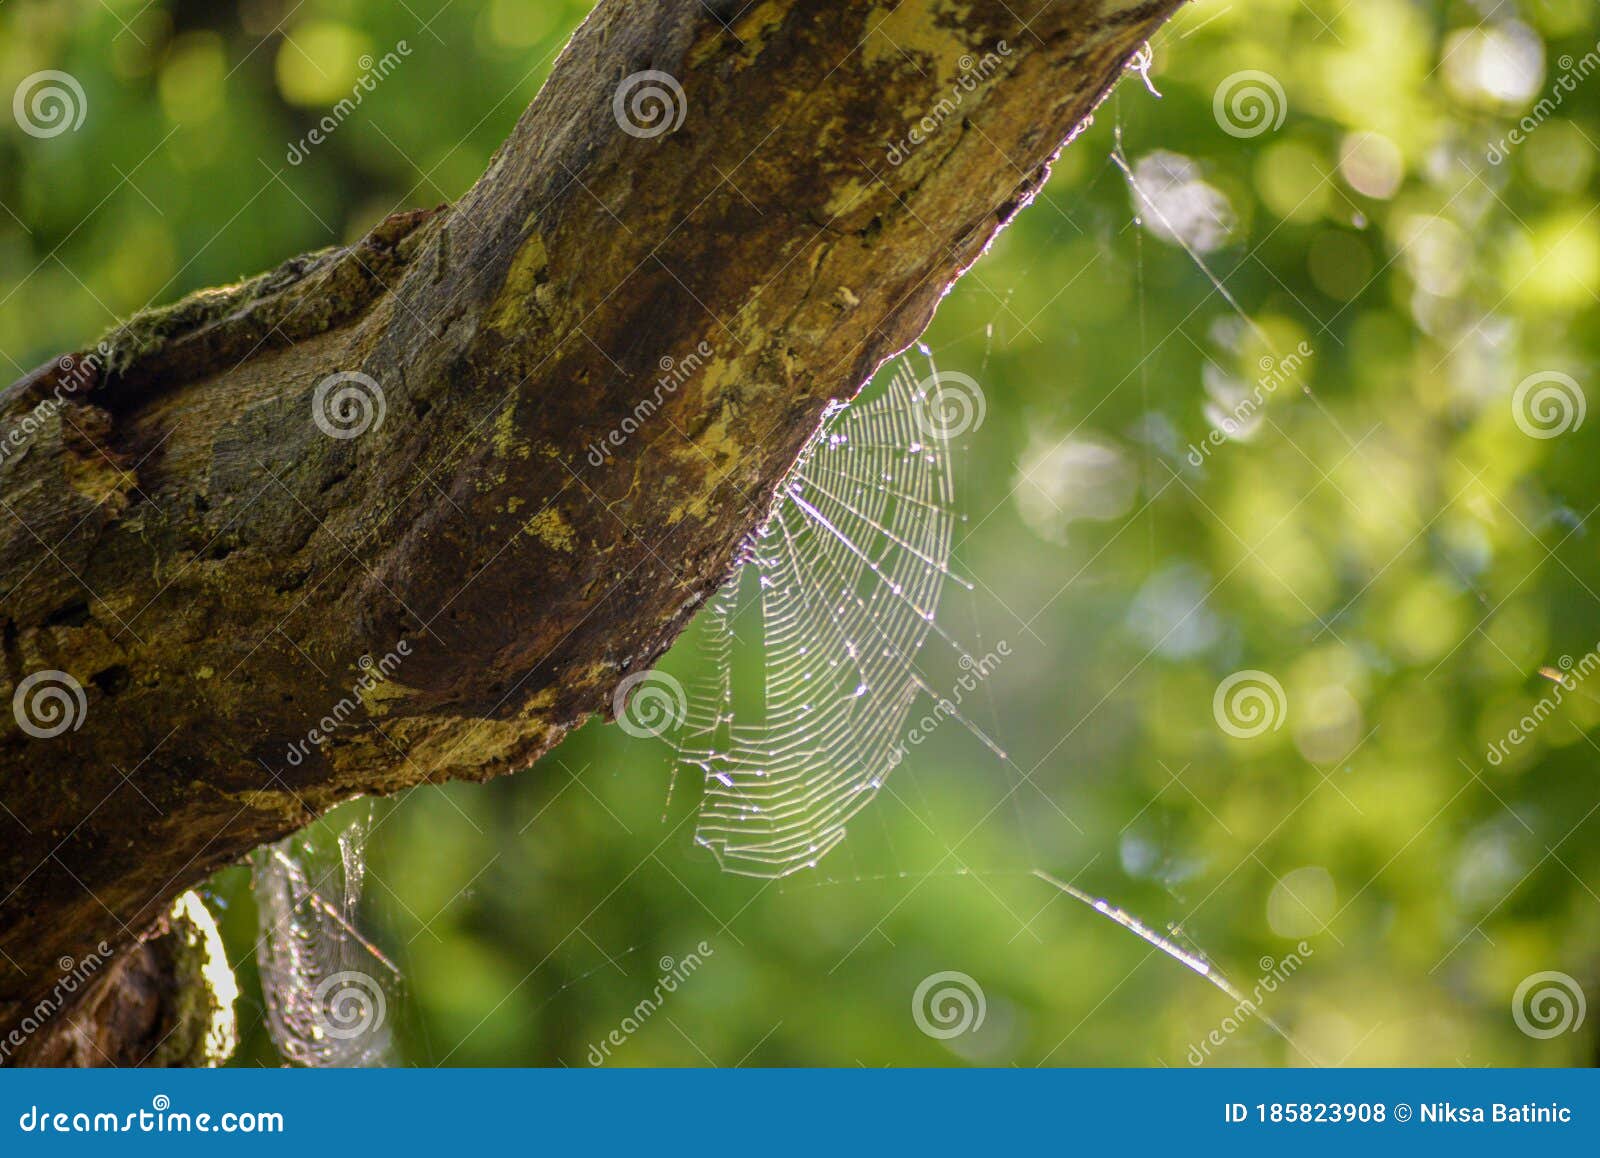 a spider`s web on an old tree